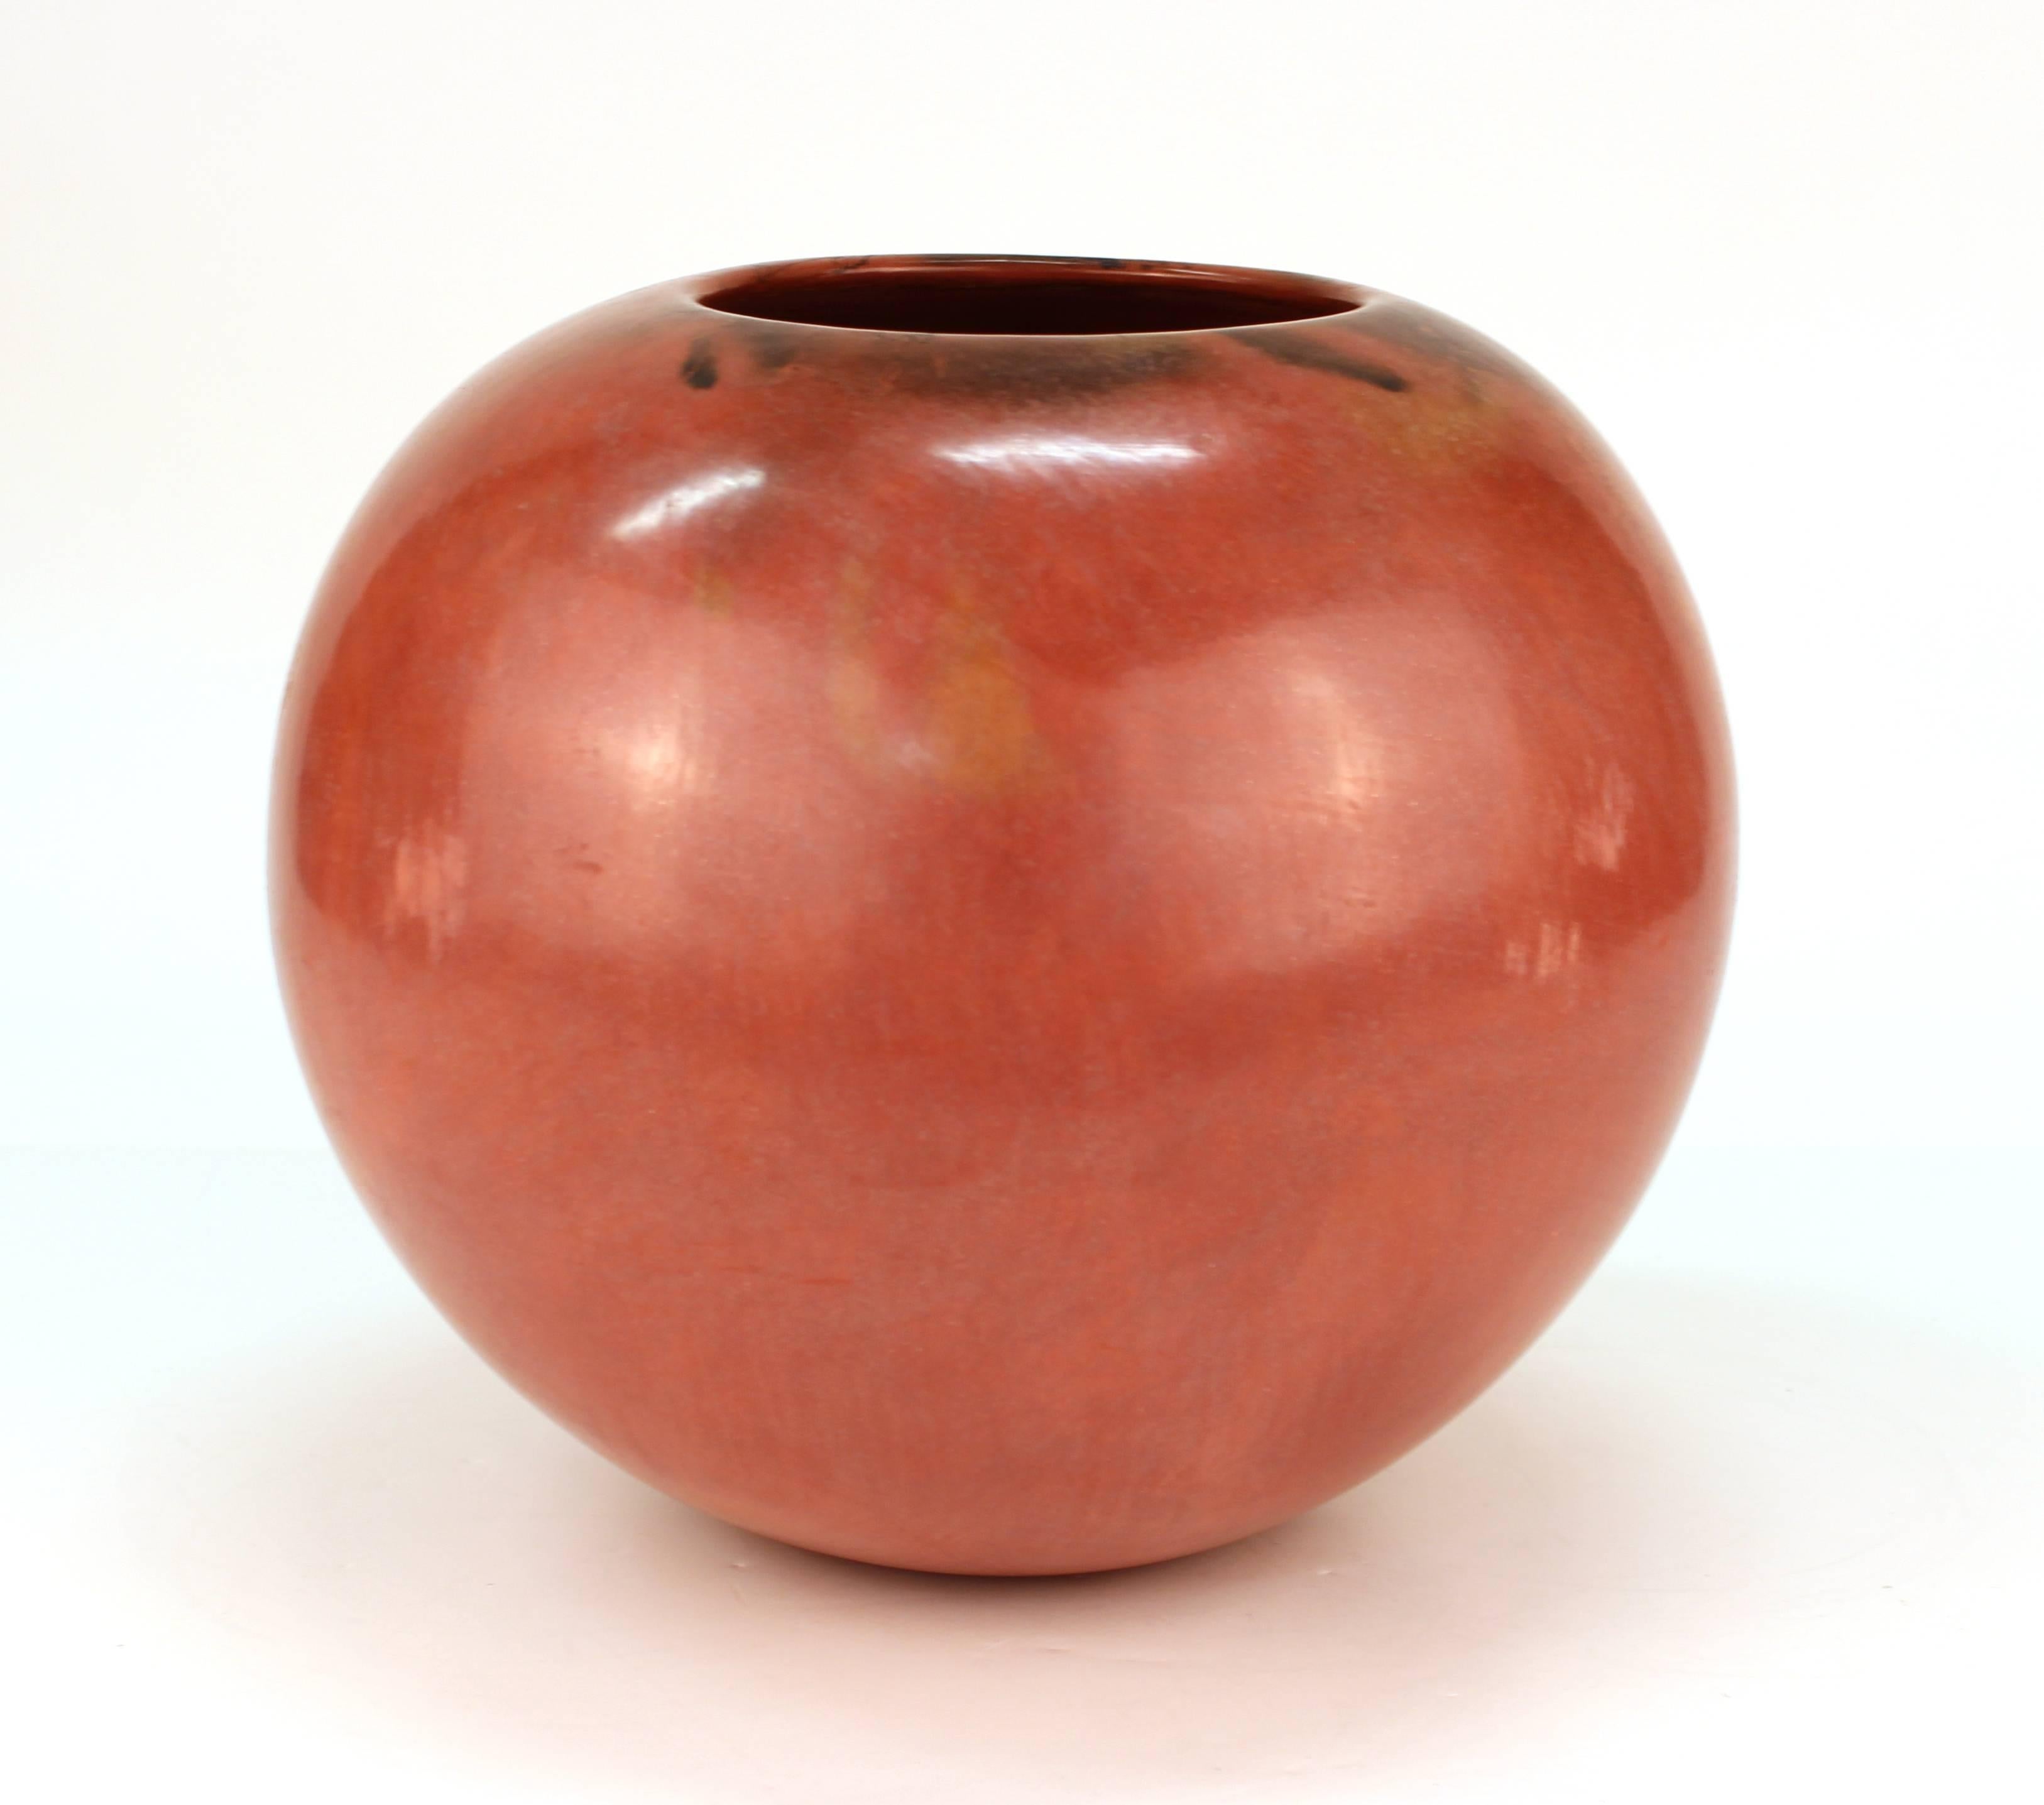 Mary Witkop (1948-2010) signed New Mexico pueblo Studio Pottery vessel in pomegranate red. The piece is signed and dated 1983 on the bottom and is in great vintage condition.